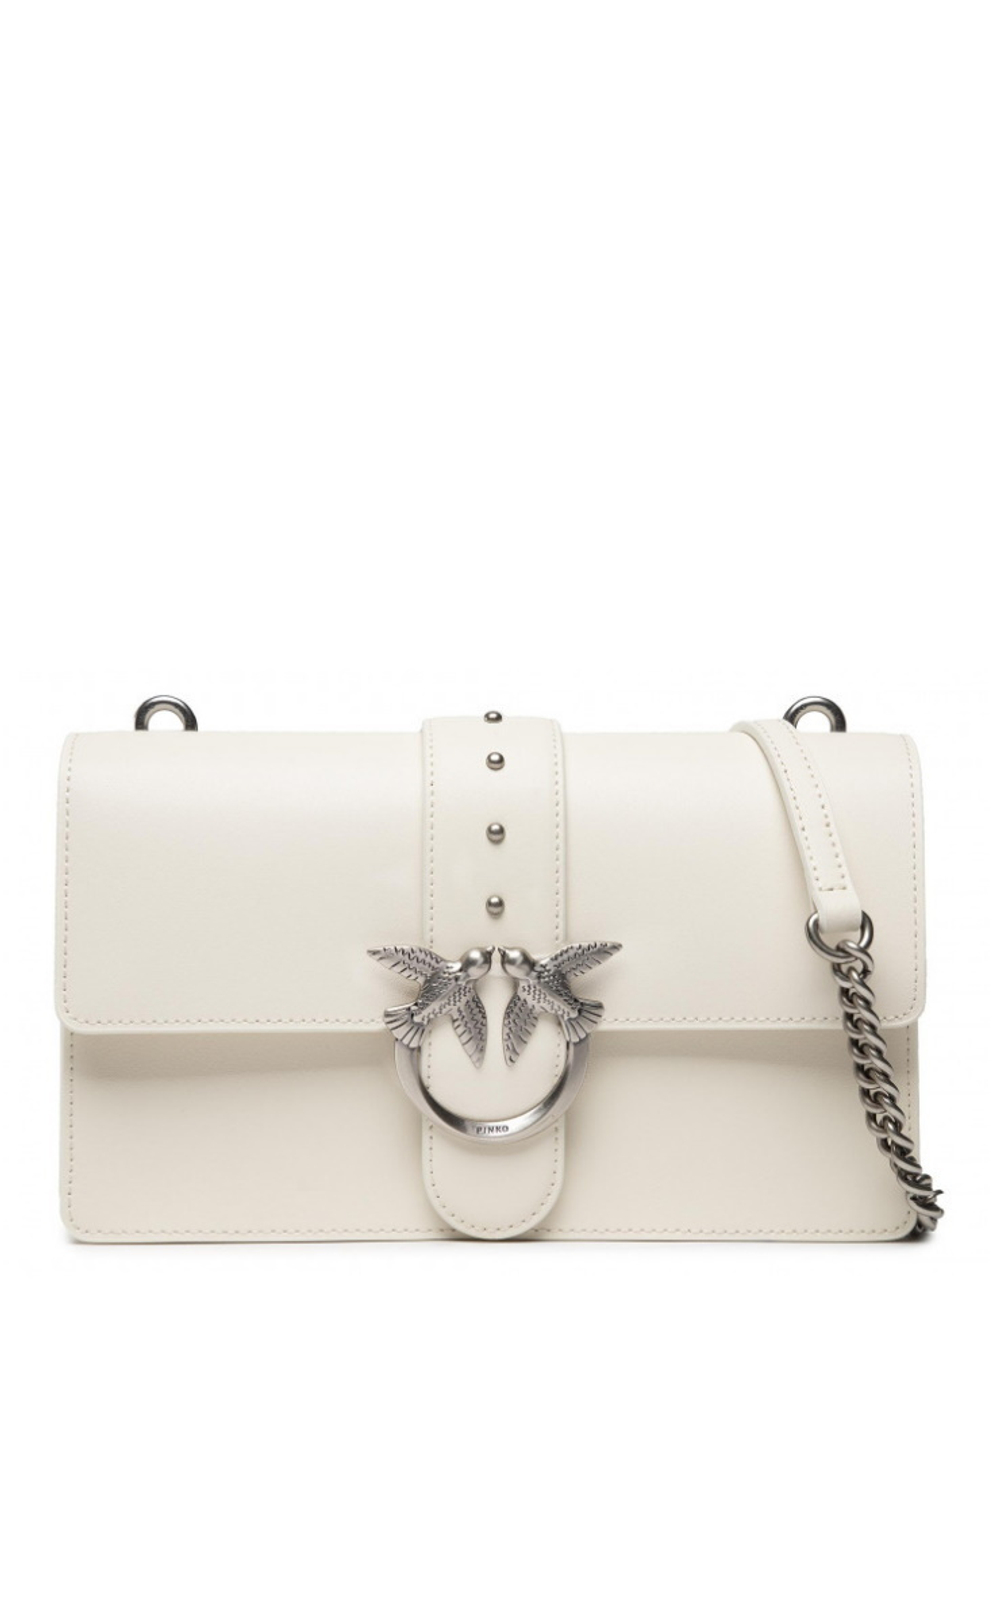 CLASSIC LOVE BAG SIMPLY – white silver